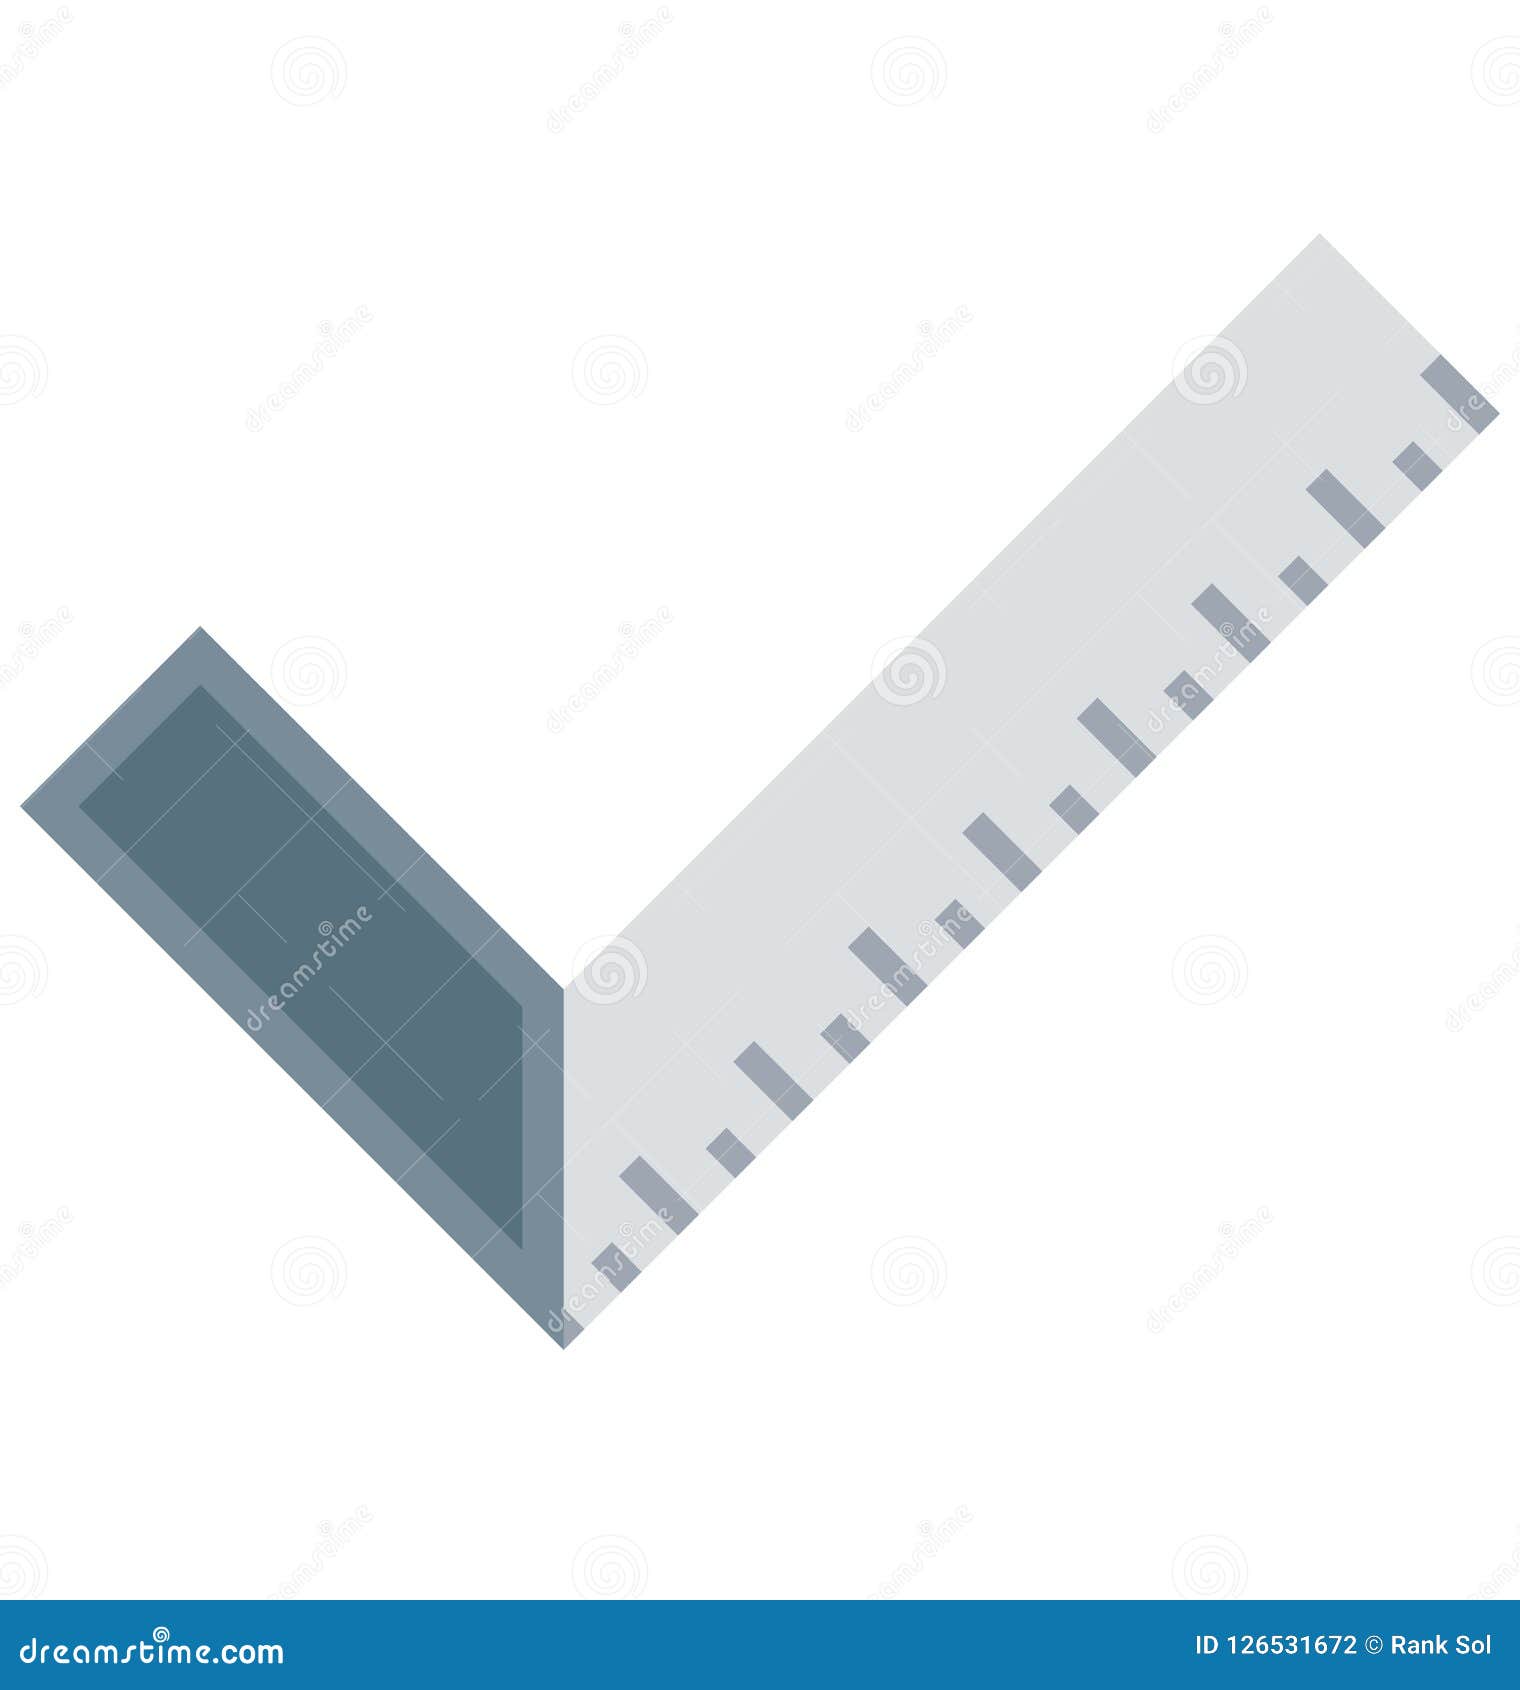 Architecture Ruler Isolated Vector Icon for Construction Stock